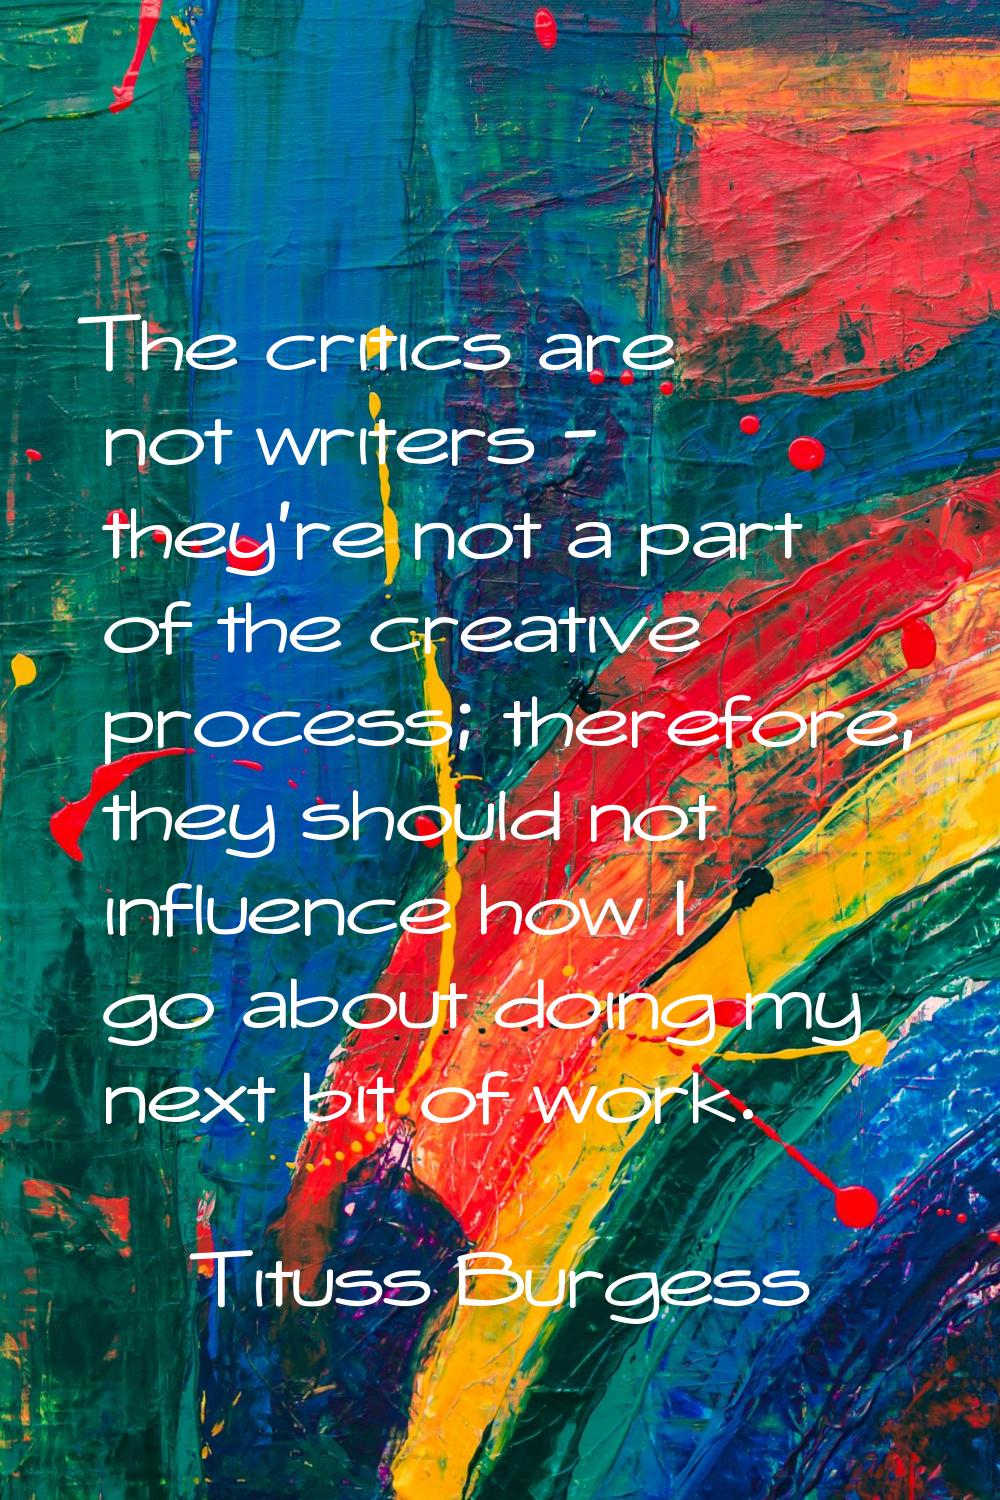 The critics are not writers - they're not a part of the creative process; therefore, they should no